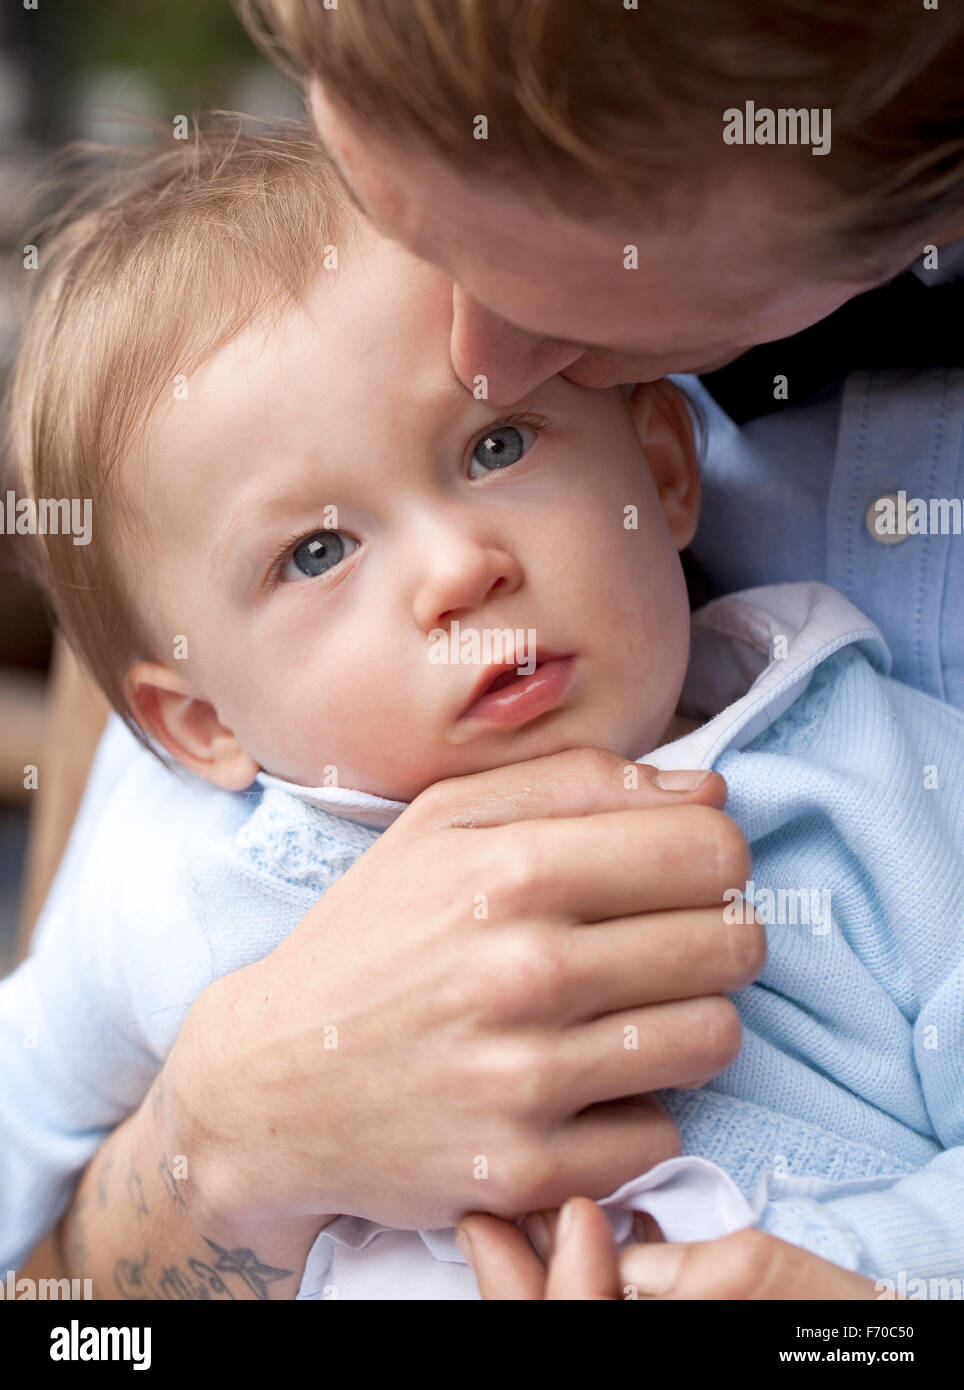 Gentle Kiss. A young baby boy is being gently kissed by his father. His father is holding the young child tenderly. Stock Photo